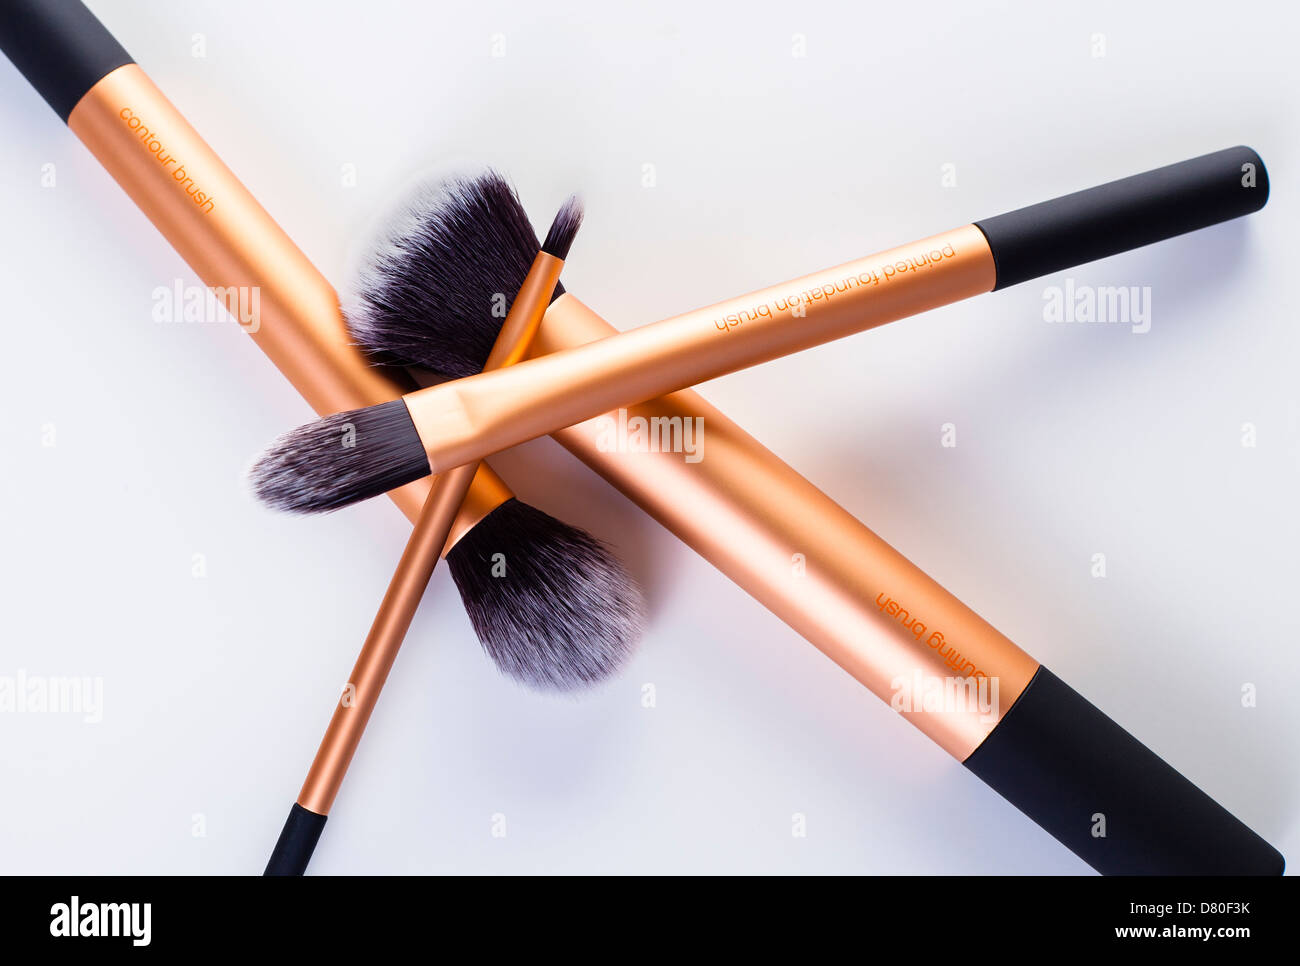 stack of four bronze makeup brushes in an abstract shape Stock Photo